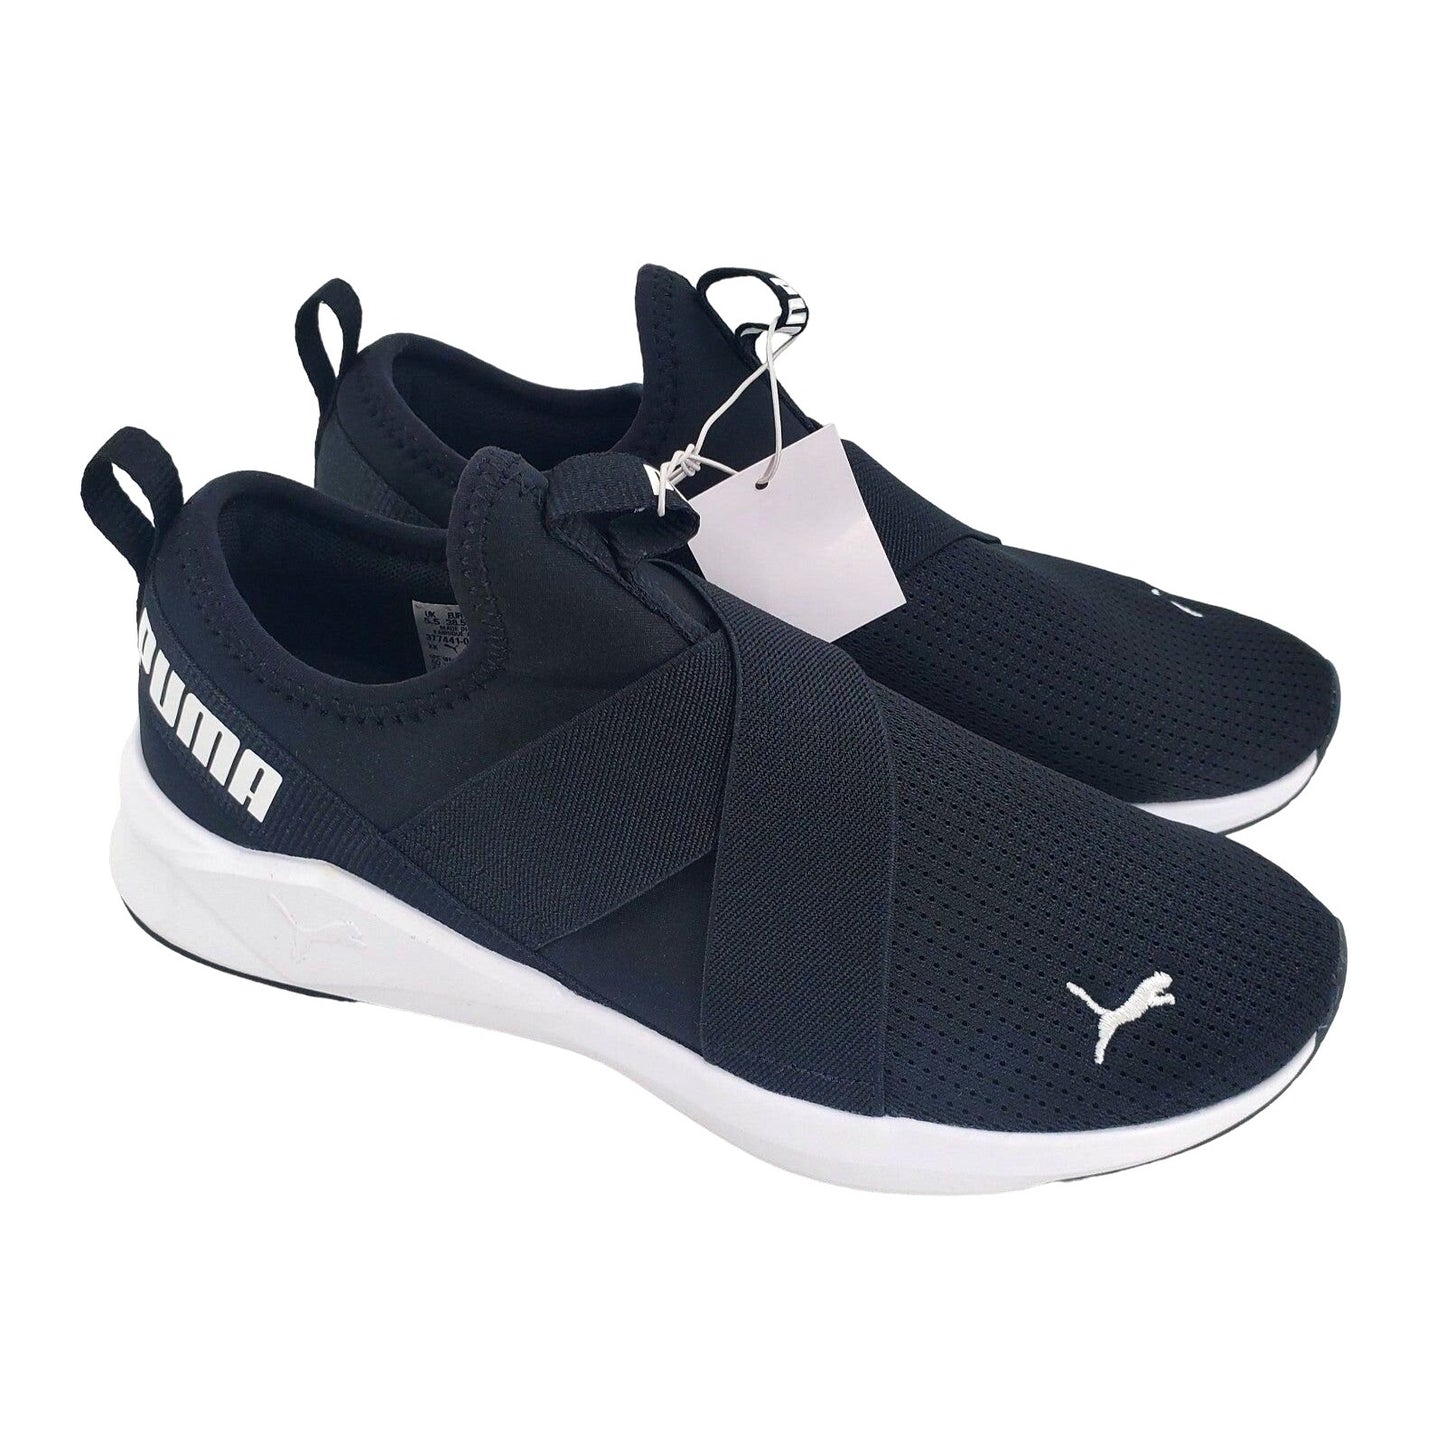 PUMA Sneakers Women's Chroma Prowl Activewear Slip-On Athletic Shoes